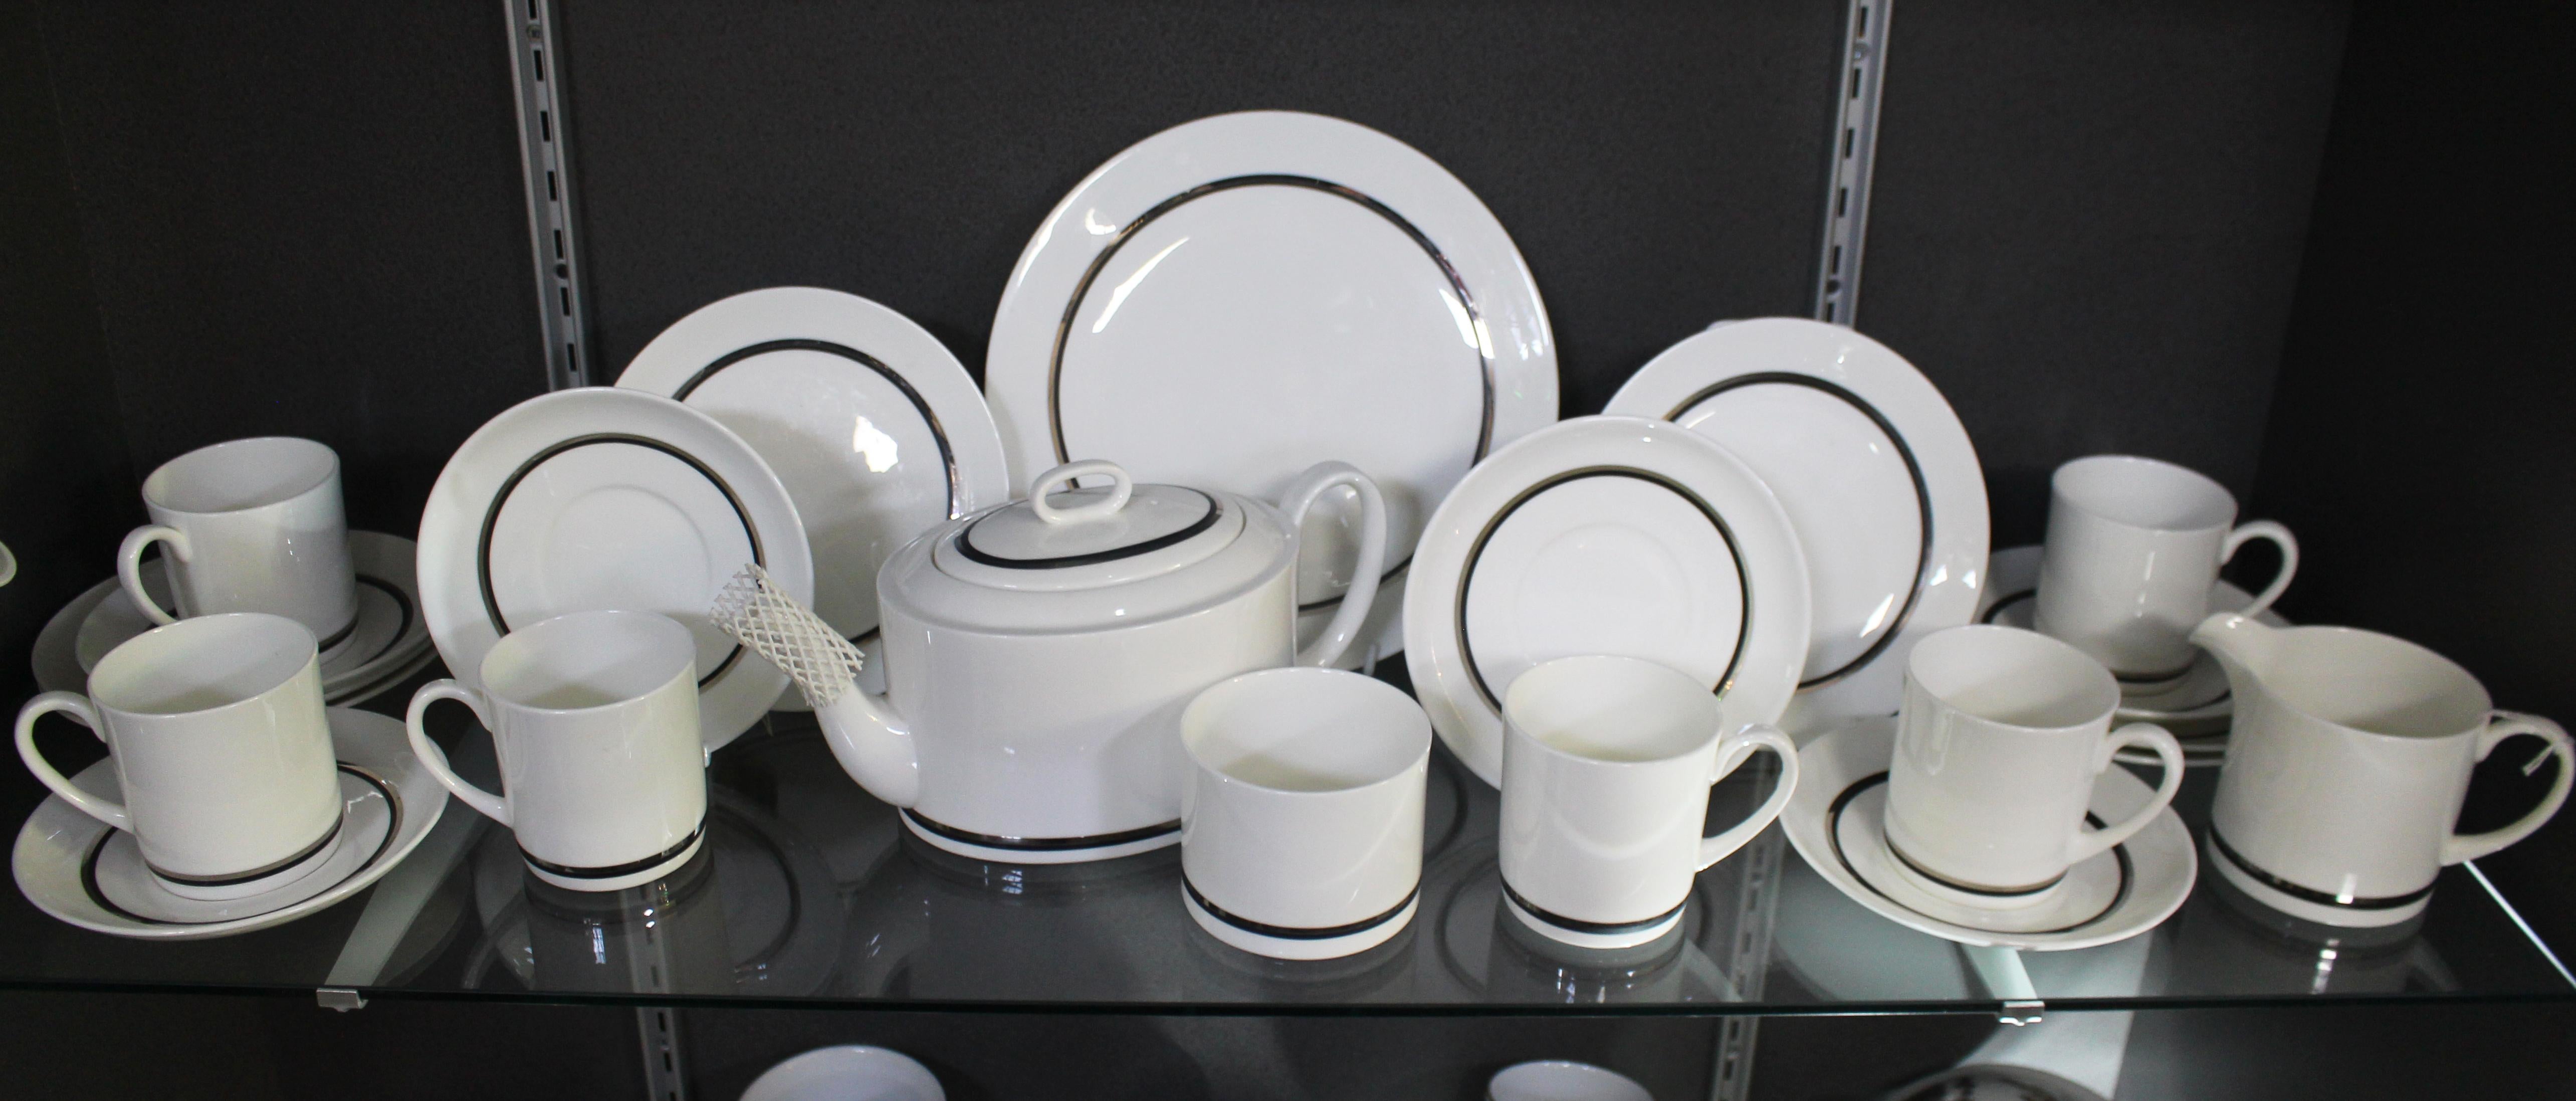 Wedgwood Charisma Susie cooper design 6 place tea service


Wedgwood.

Bone china, made in England

Susie Cooper design 